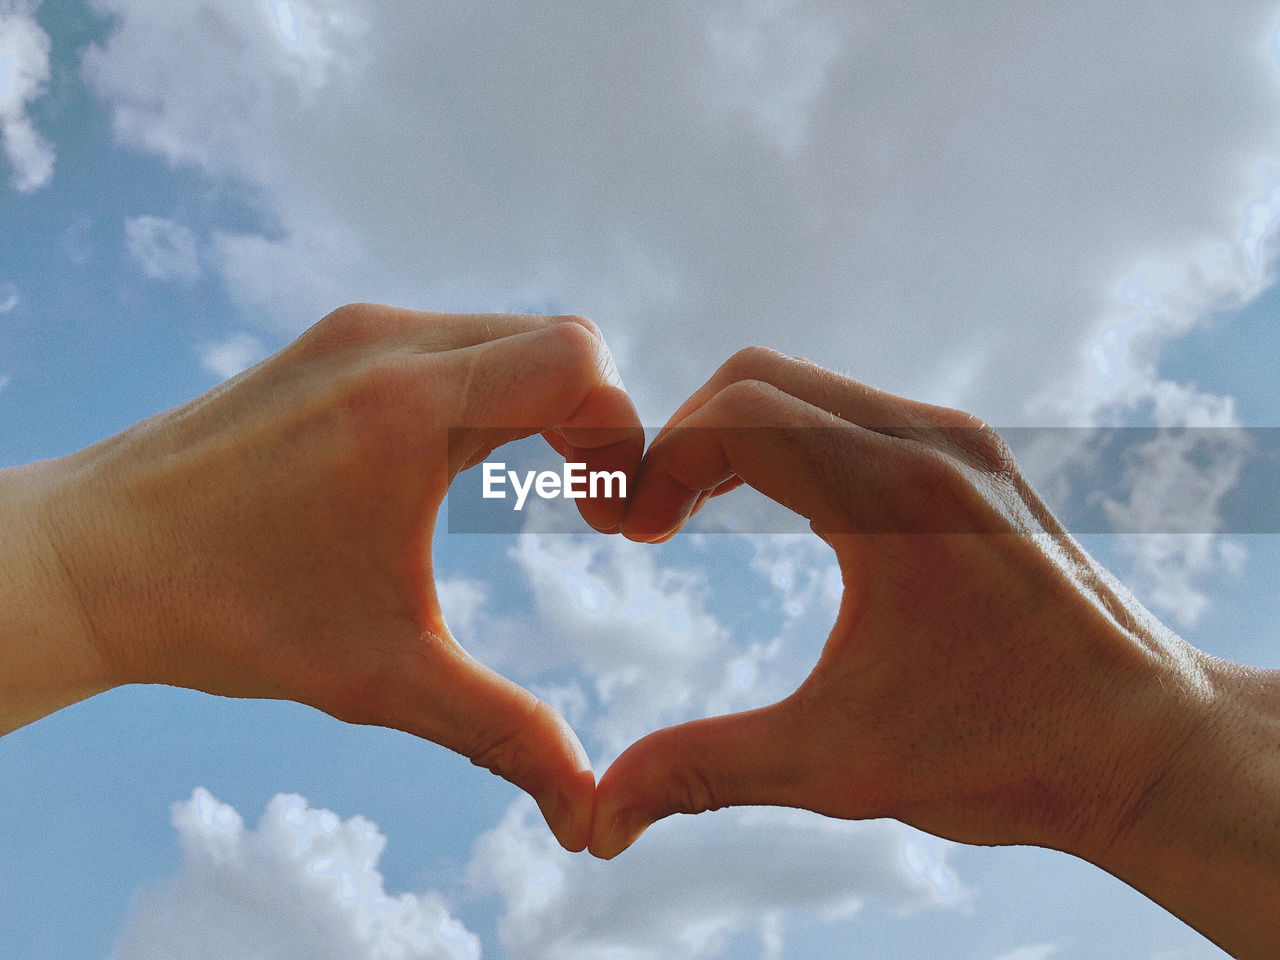 Cropped image of hand holding heart shape against sky